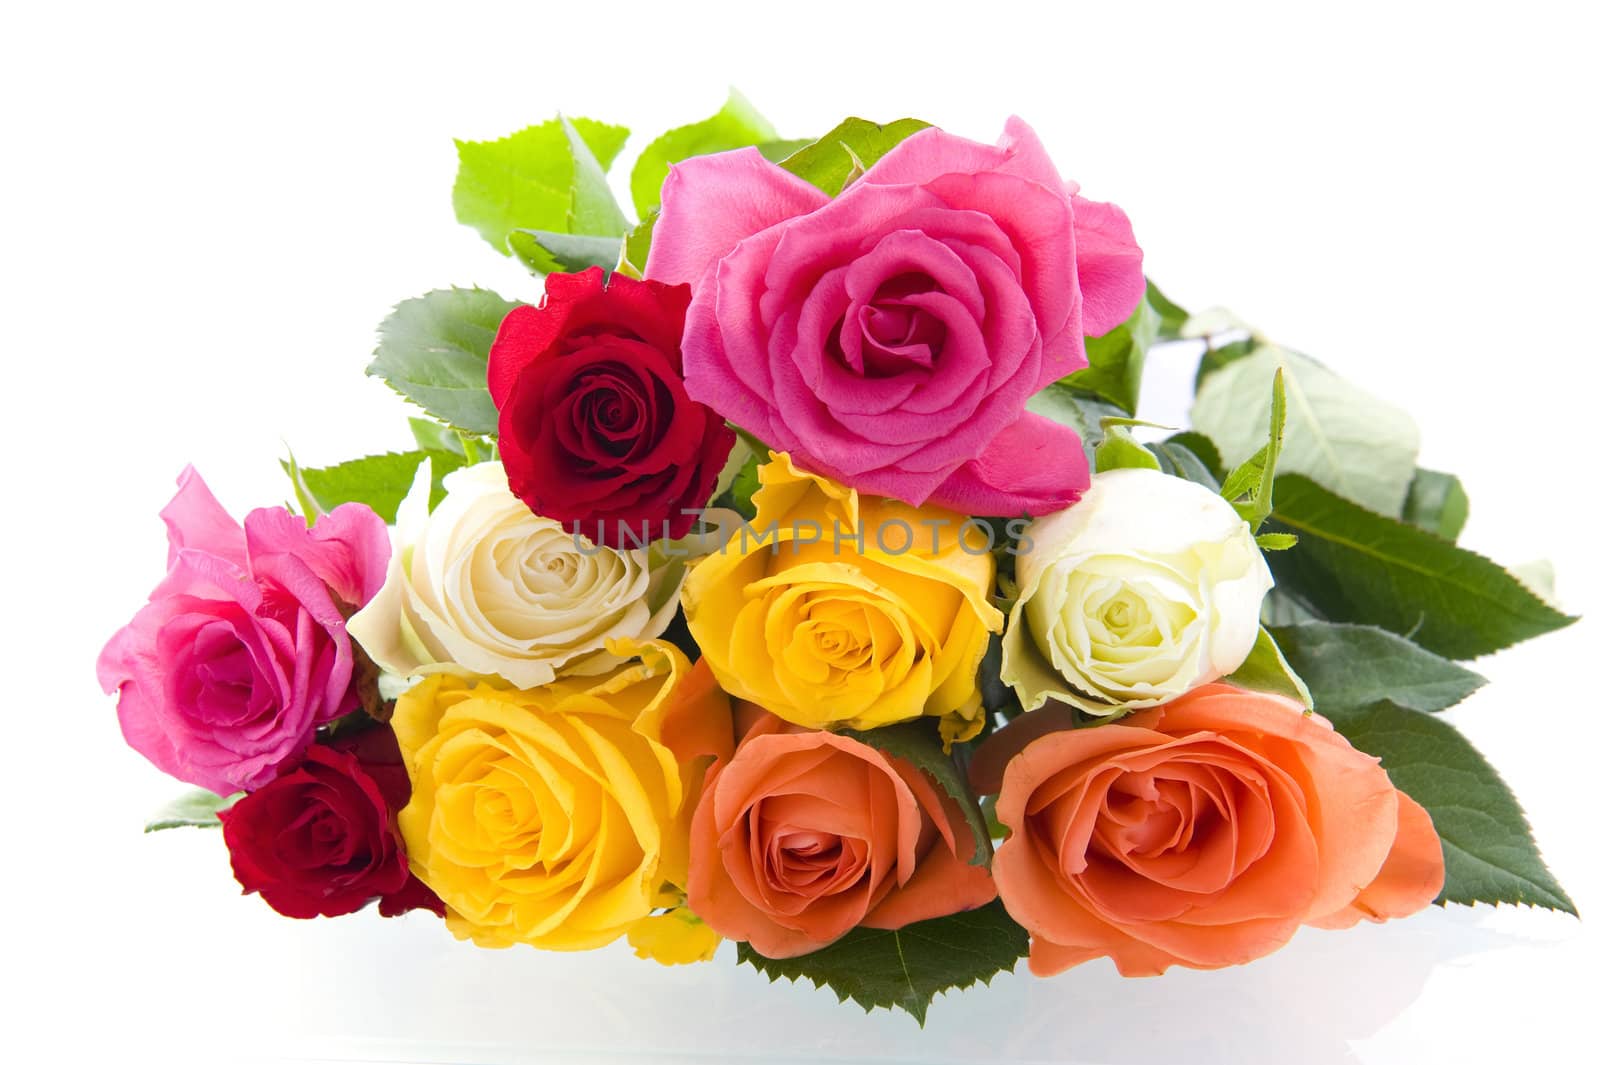 A beautiful roses on a white background